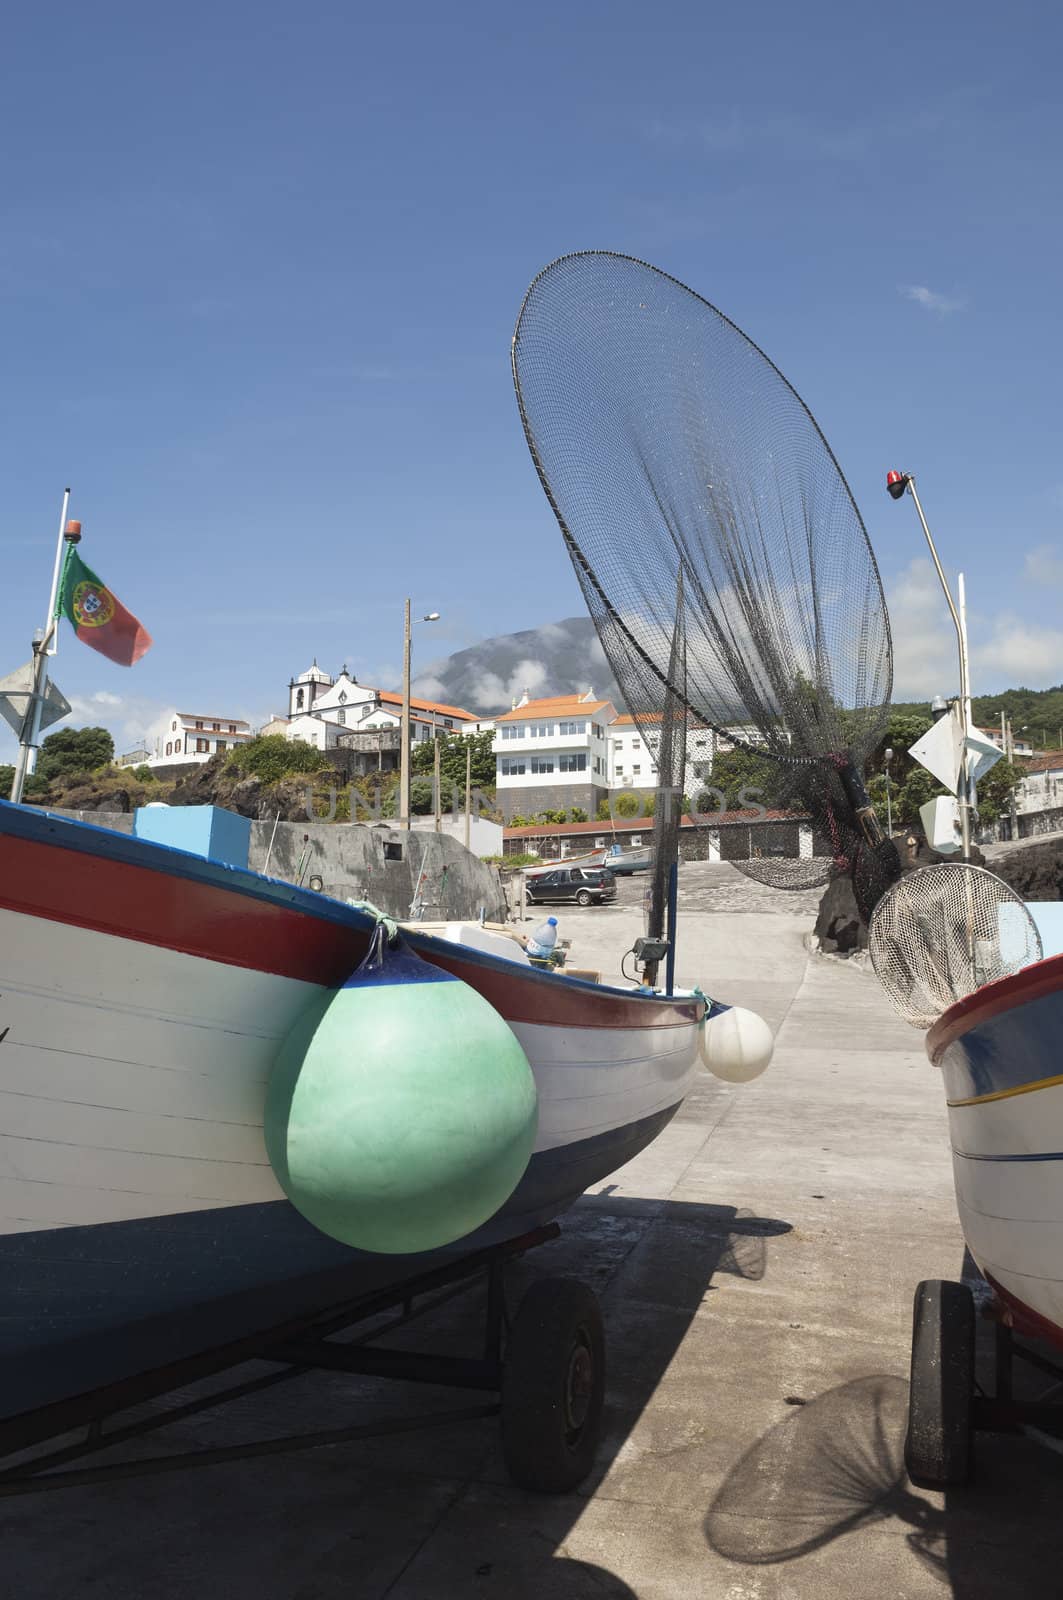 Detail of traditional fishing boats in Pico island, Azores